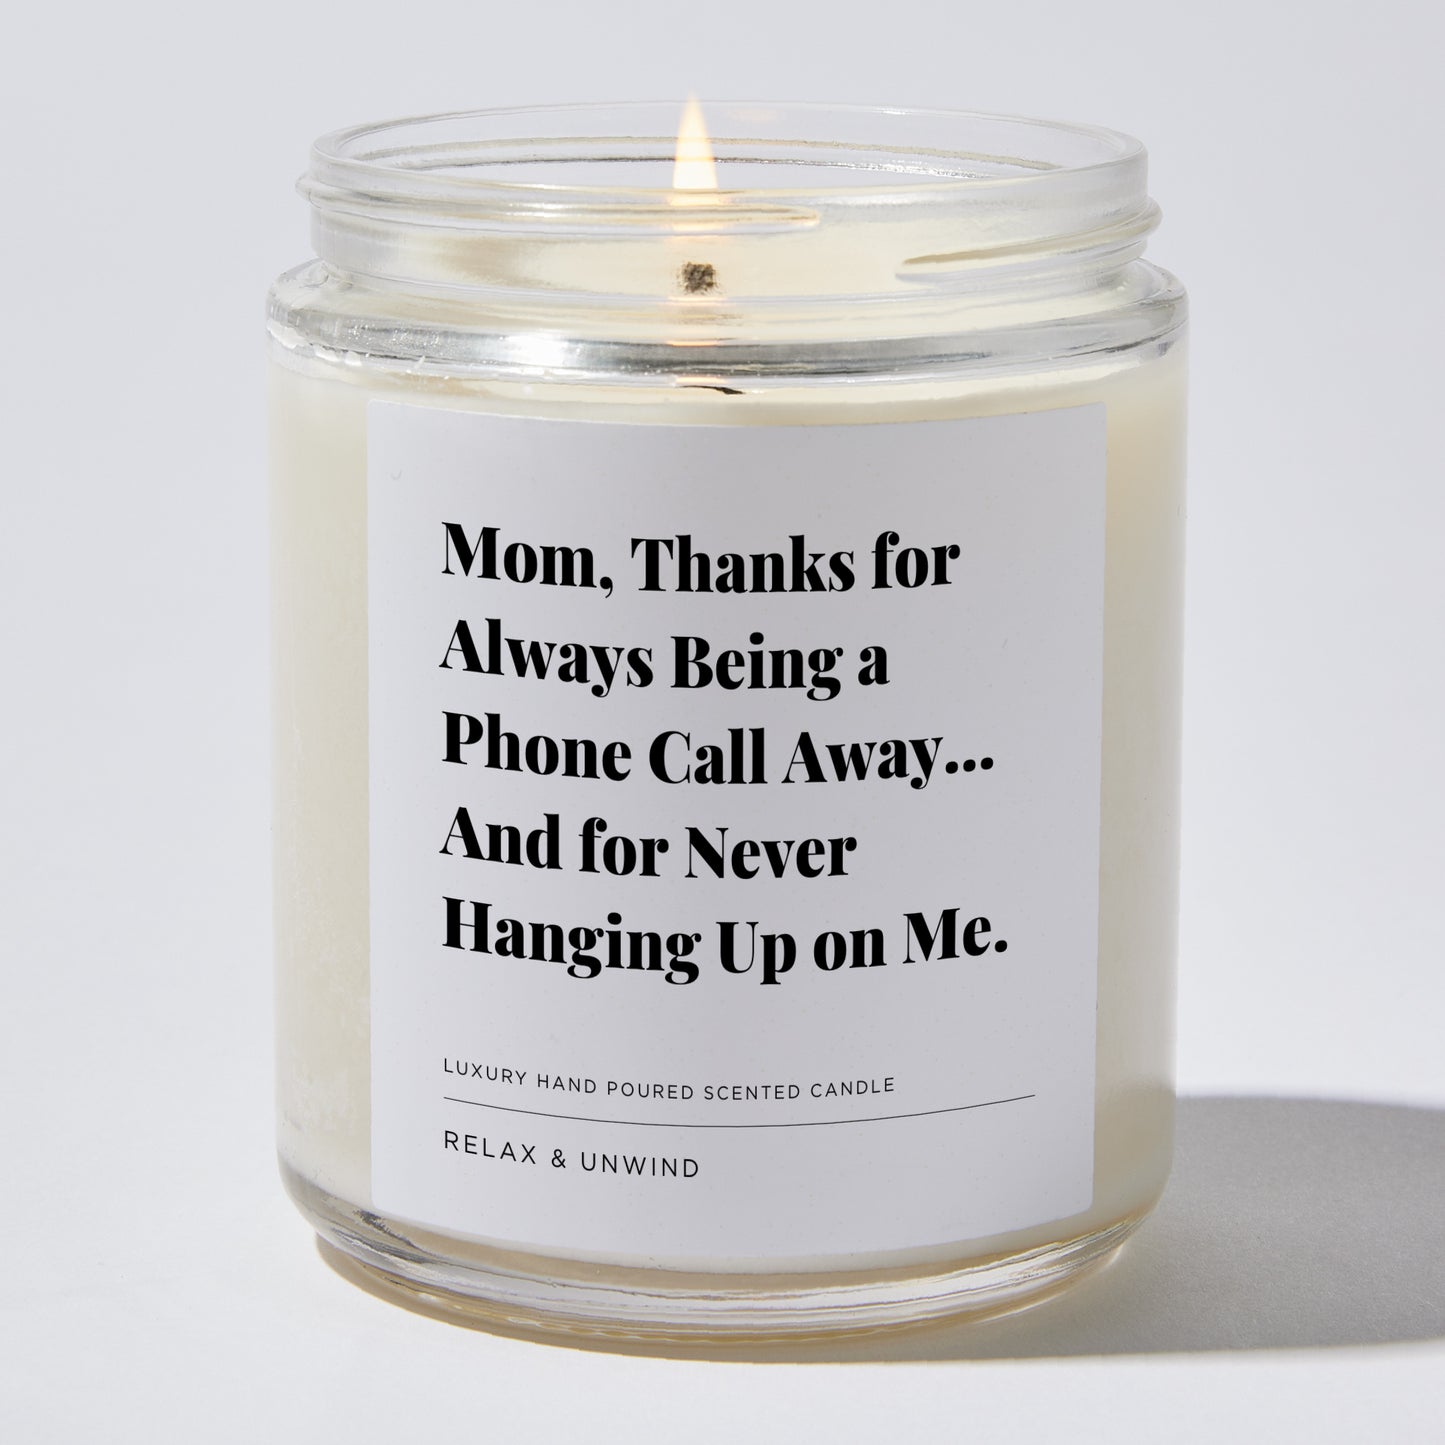 Gift for Mom - Mom, thanks for always being a phone call away... and for never hanging up on me. - Candle